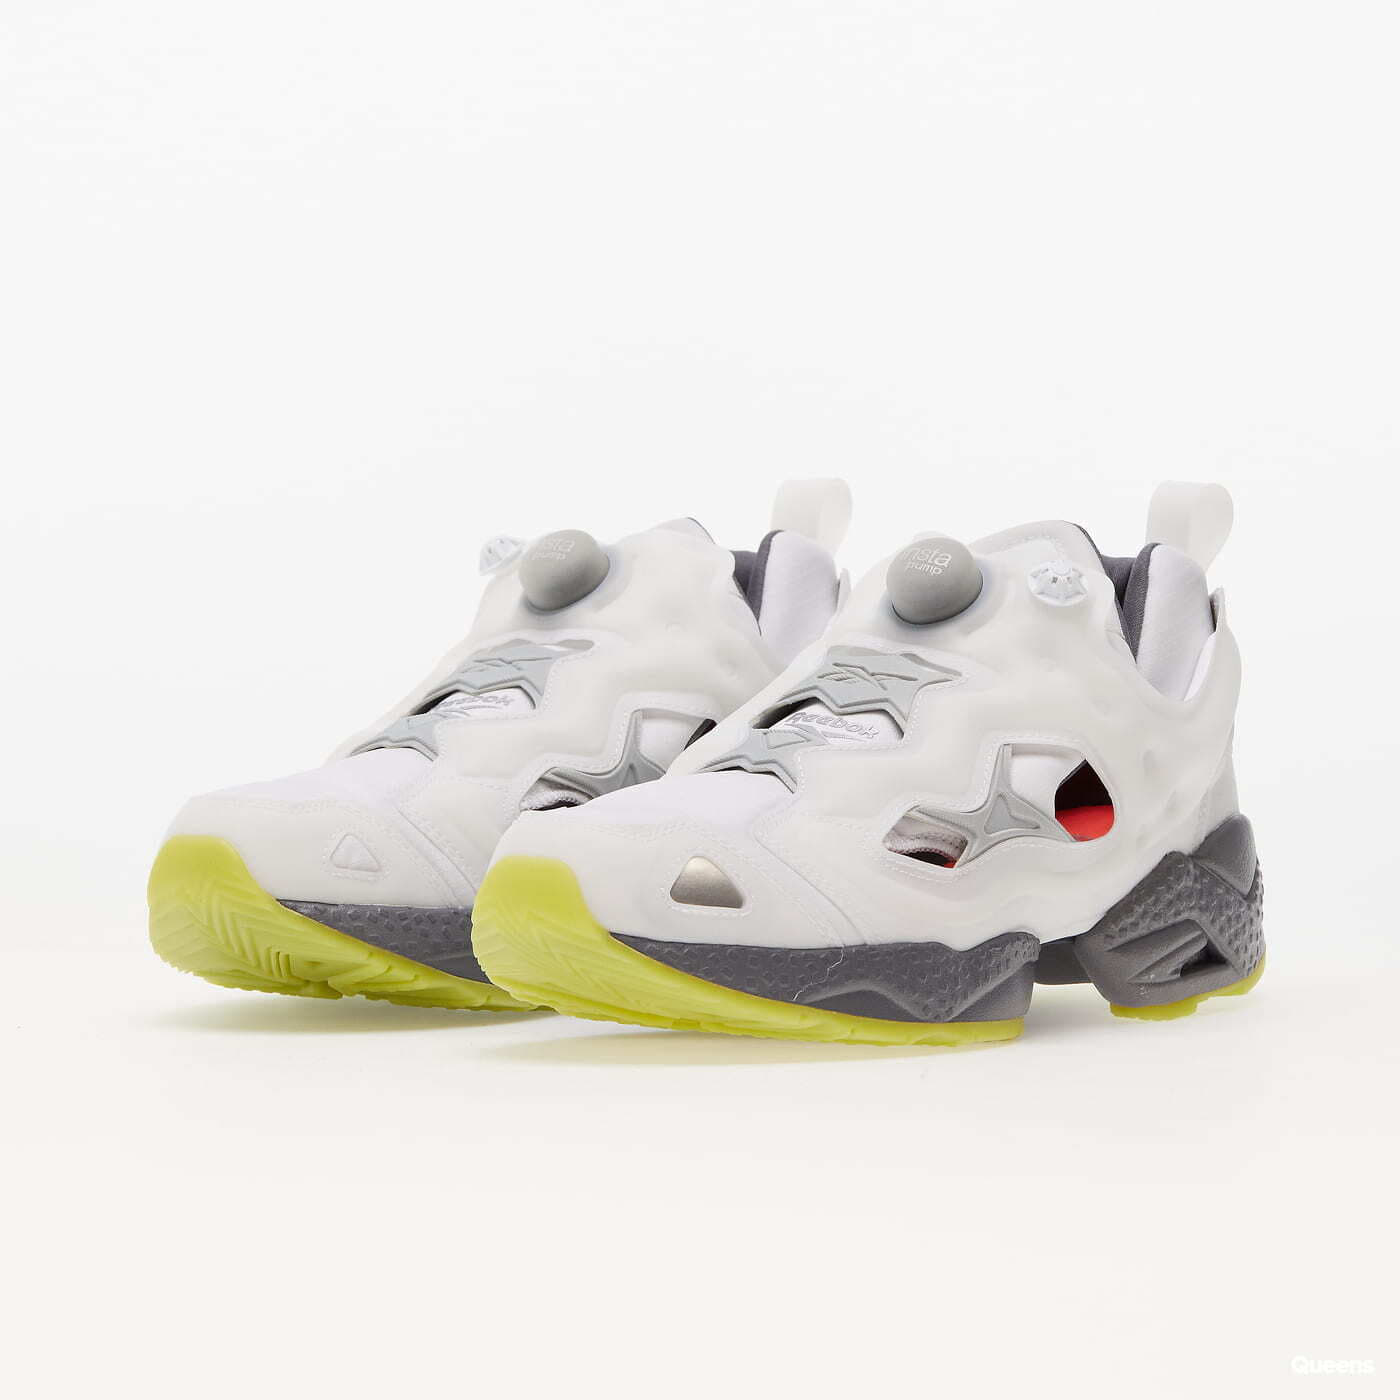 Men's sneakers and shoes Reebok Instapump Fury 96 Cloud White/ Pure Grey 3/ Pure Grey 6